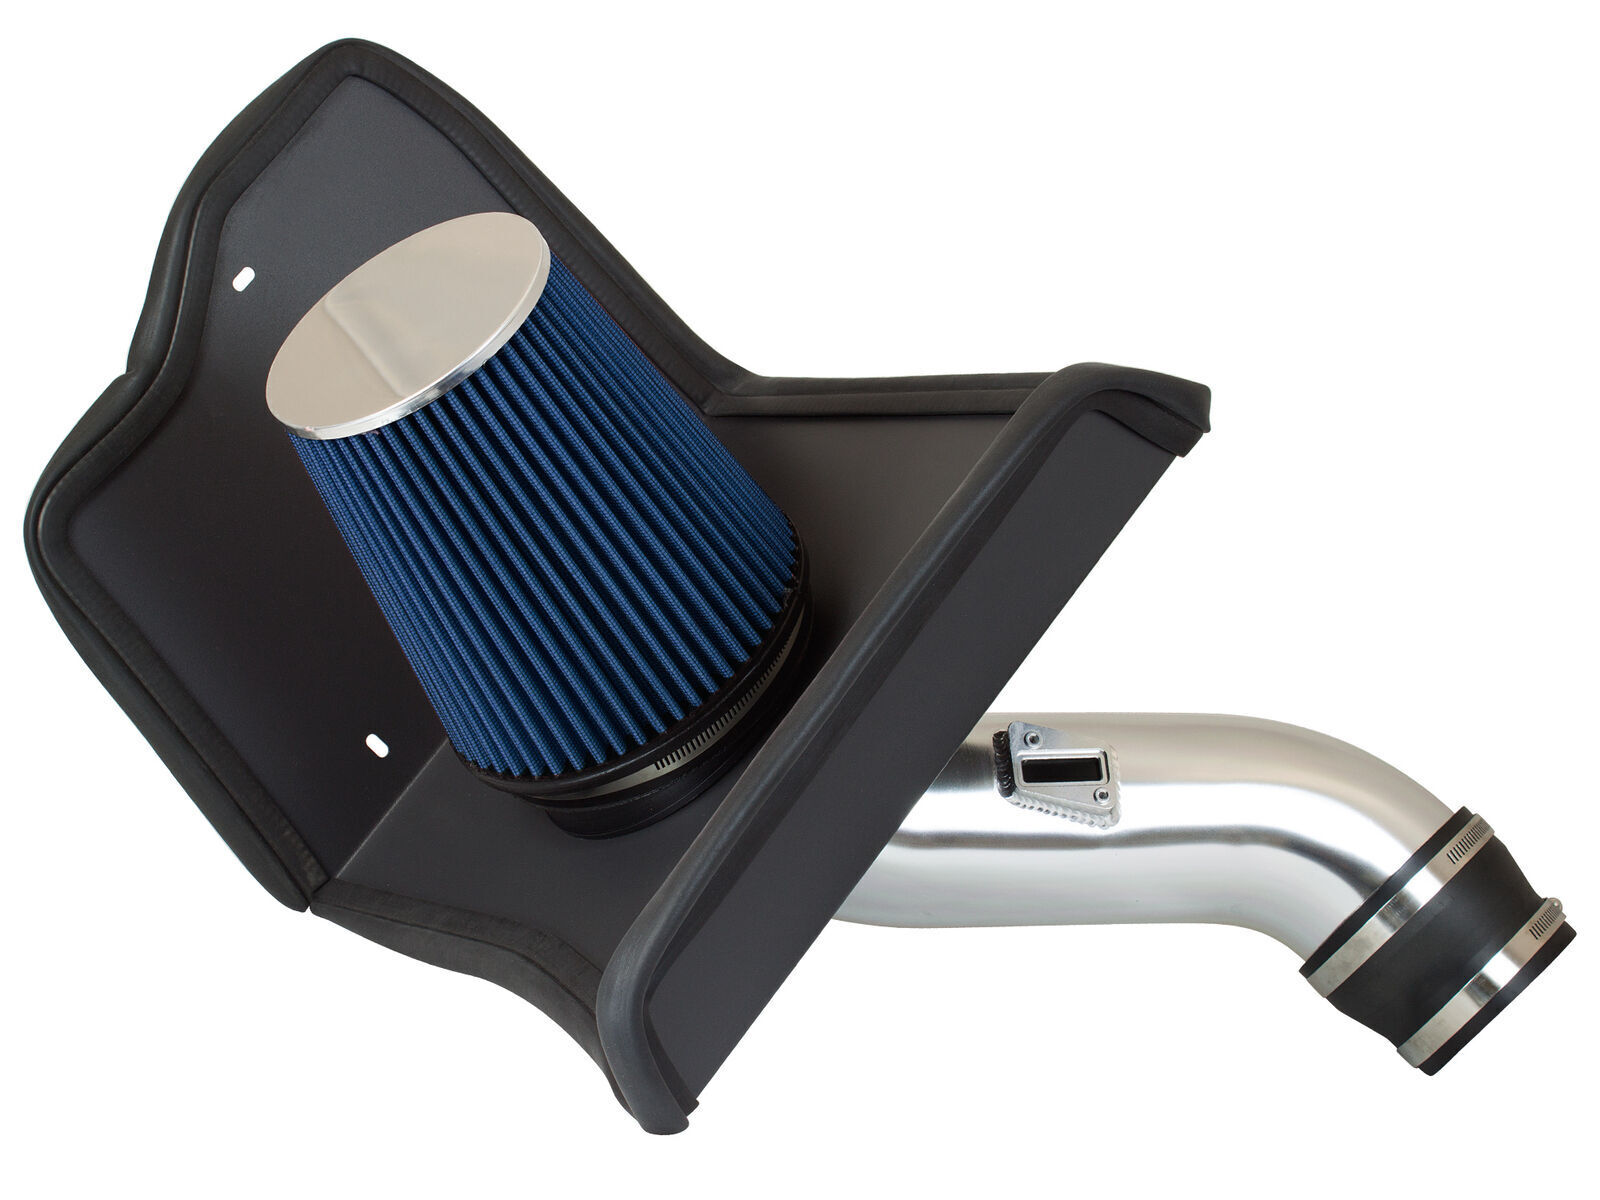 BLUE For 2012-2020 Tundra/Sequoia 5.7L V8 COLD SHIELD AIR INTAKE KIT +FILTER